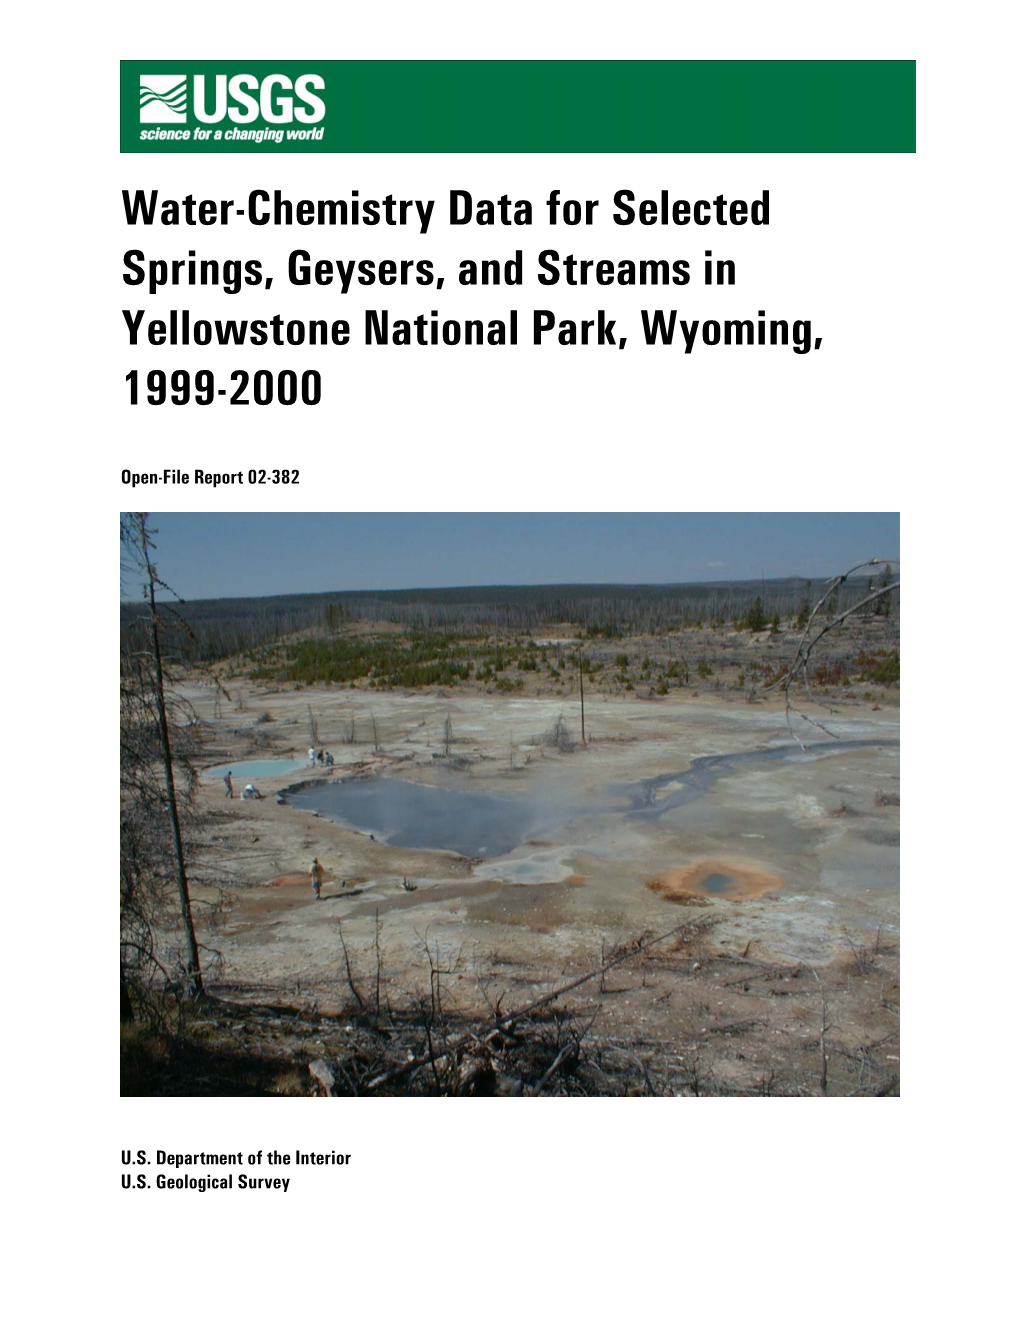 Water-Chemistry Data for Selected Springs, Geysers, and Streams in Yellowstone National Park, Wyoming, 1999-2000